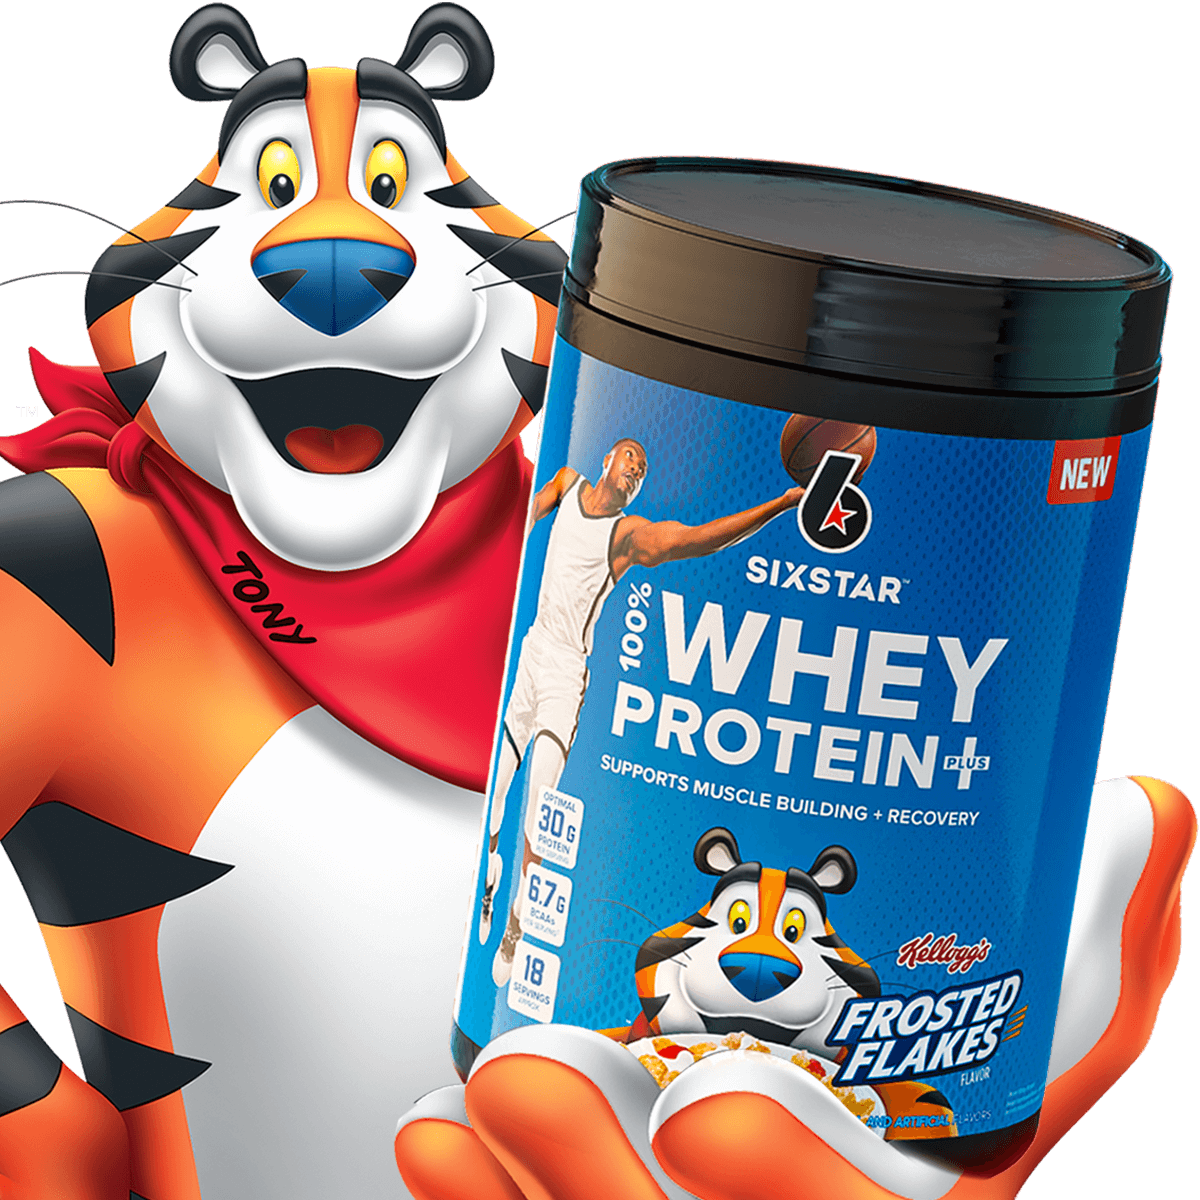 100% Whey Protein Plus - Frosted Flakes